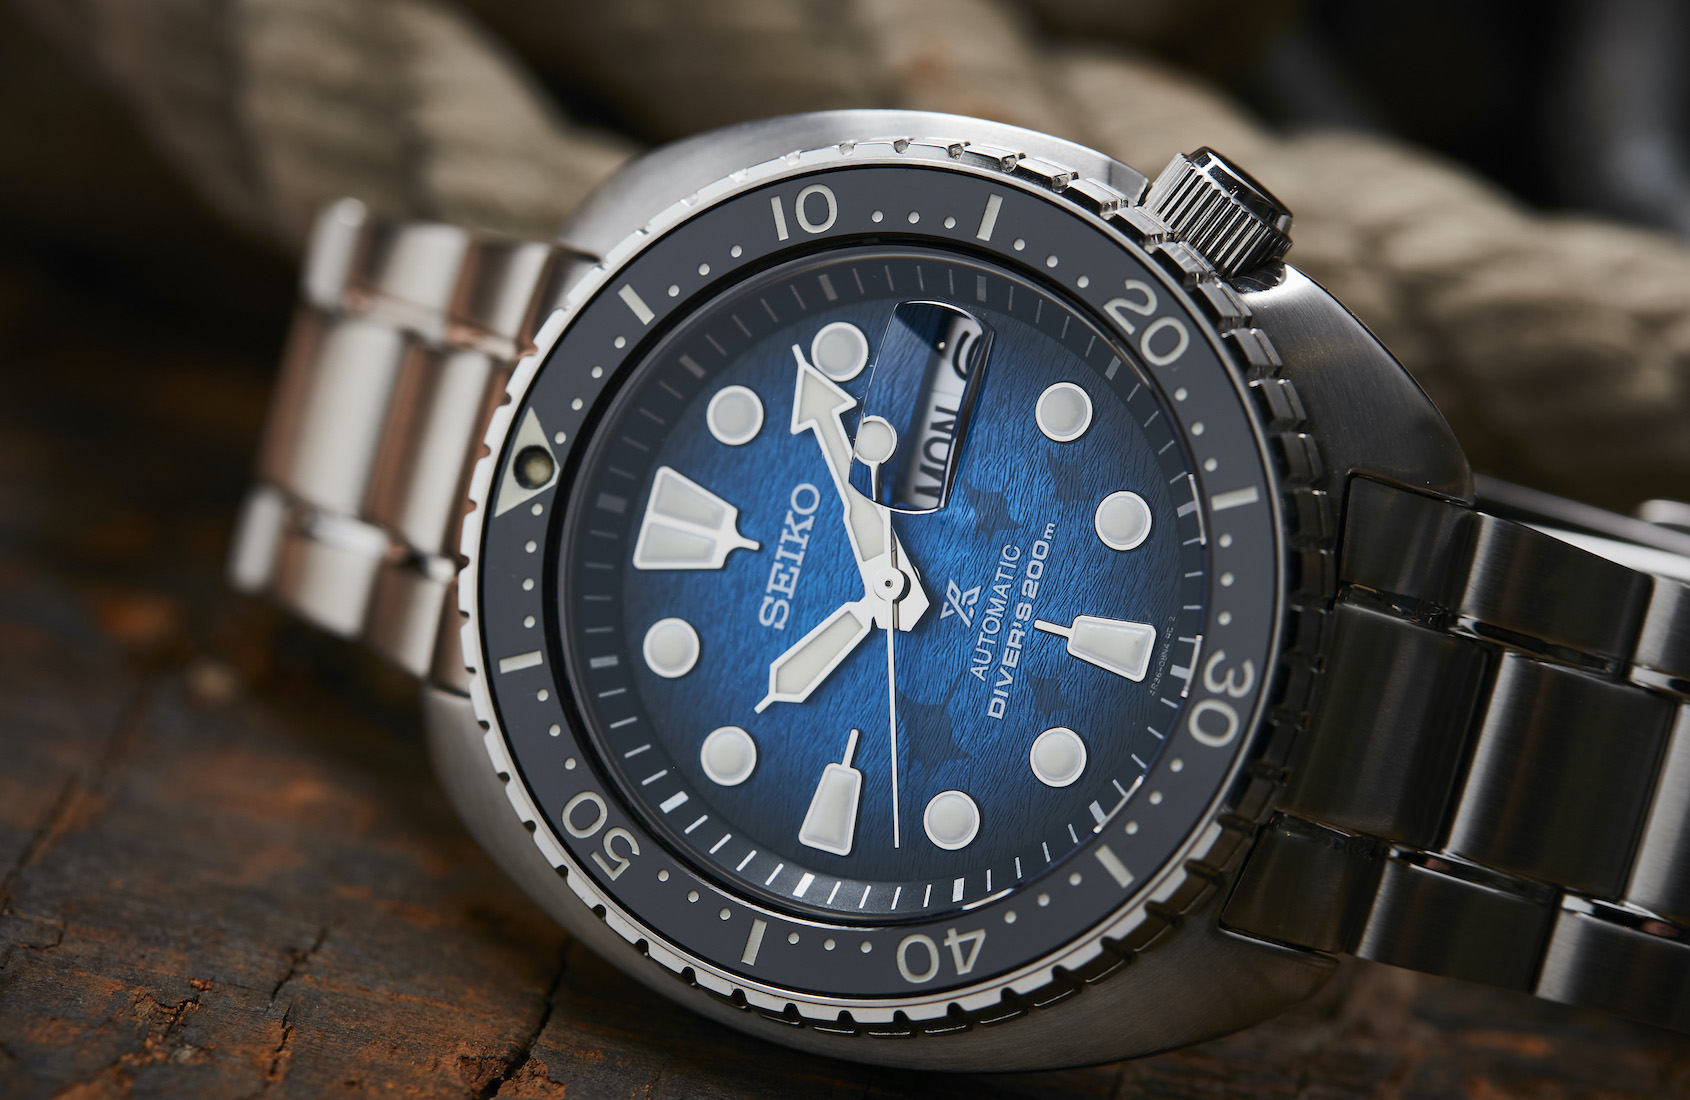 INTRODUCING: These incredible photos of the Seiko SRPE39K Save The Ocean  say it all - Time and Tide Watches